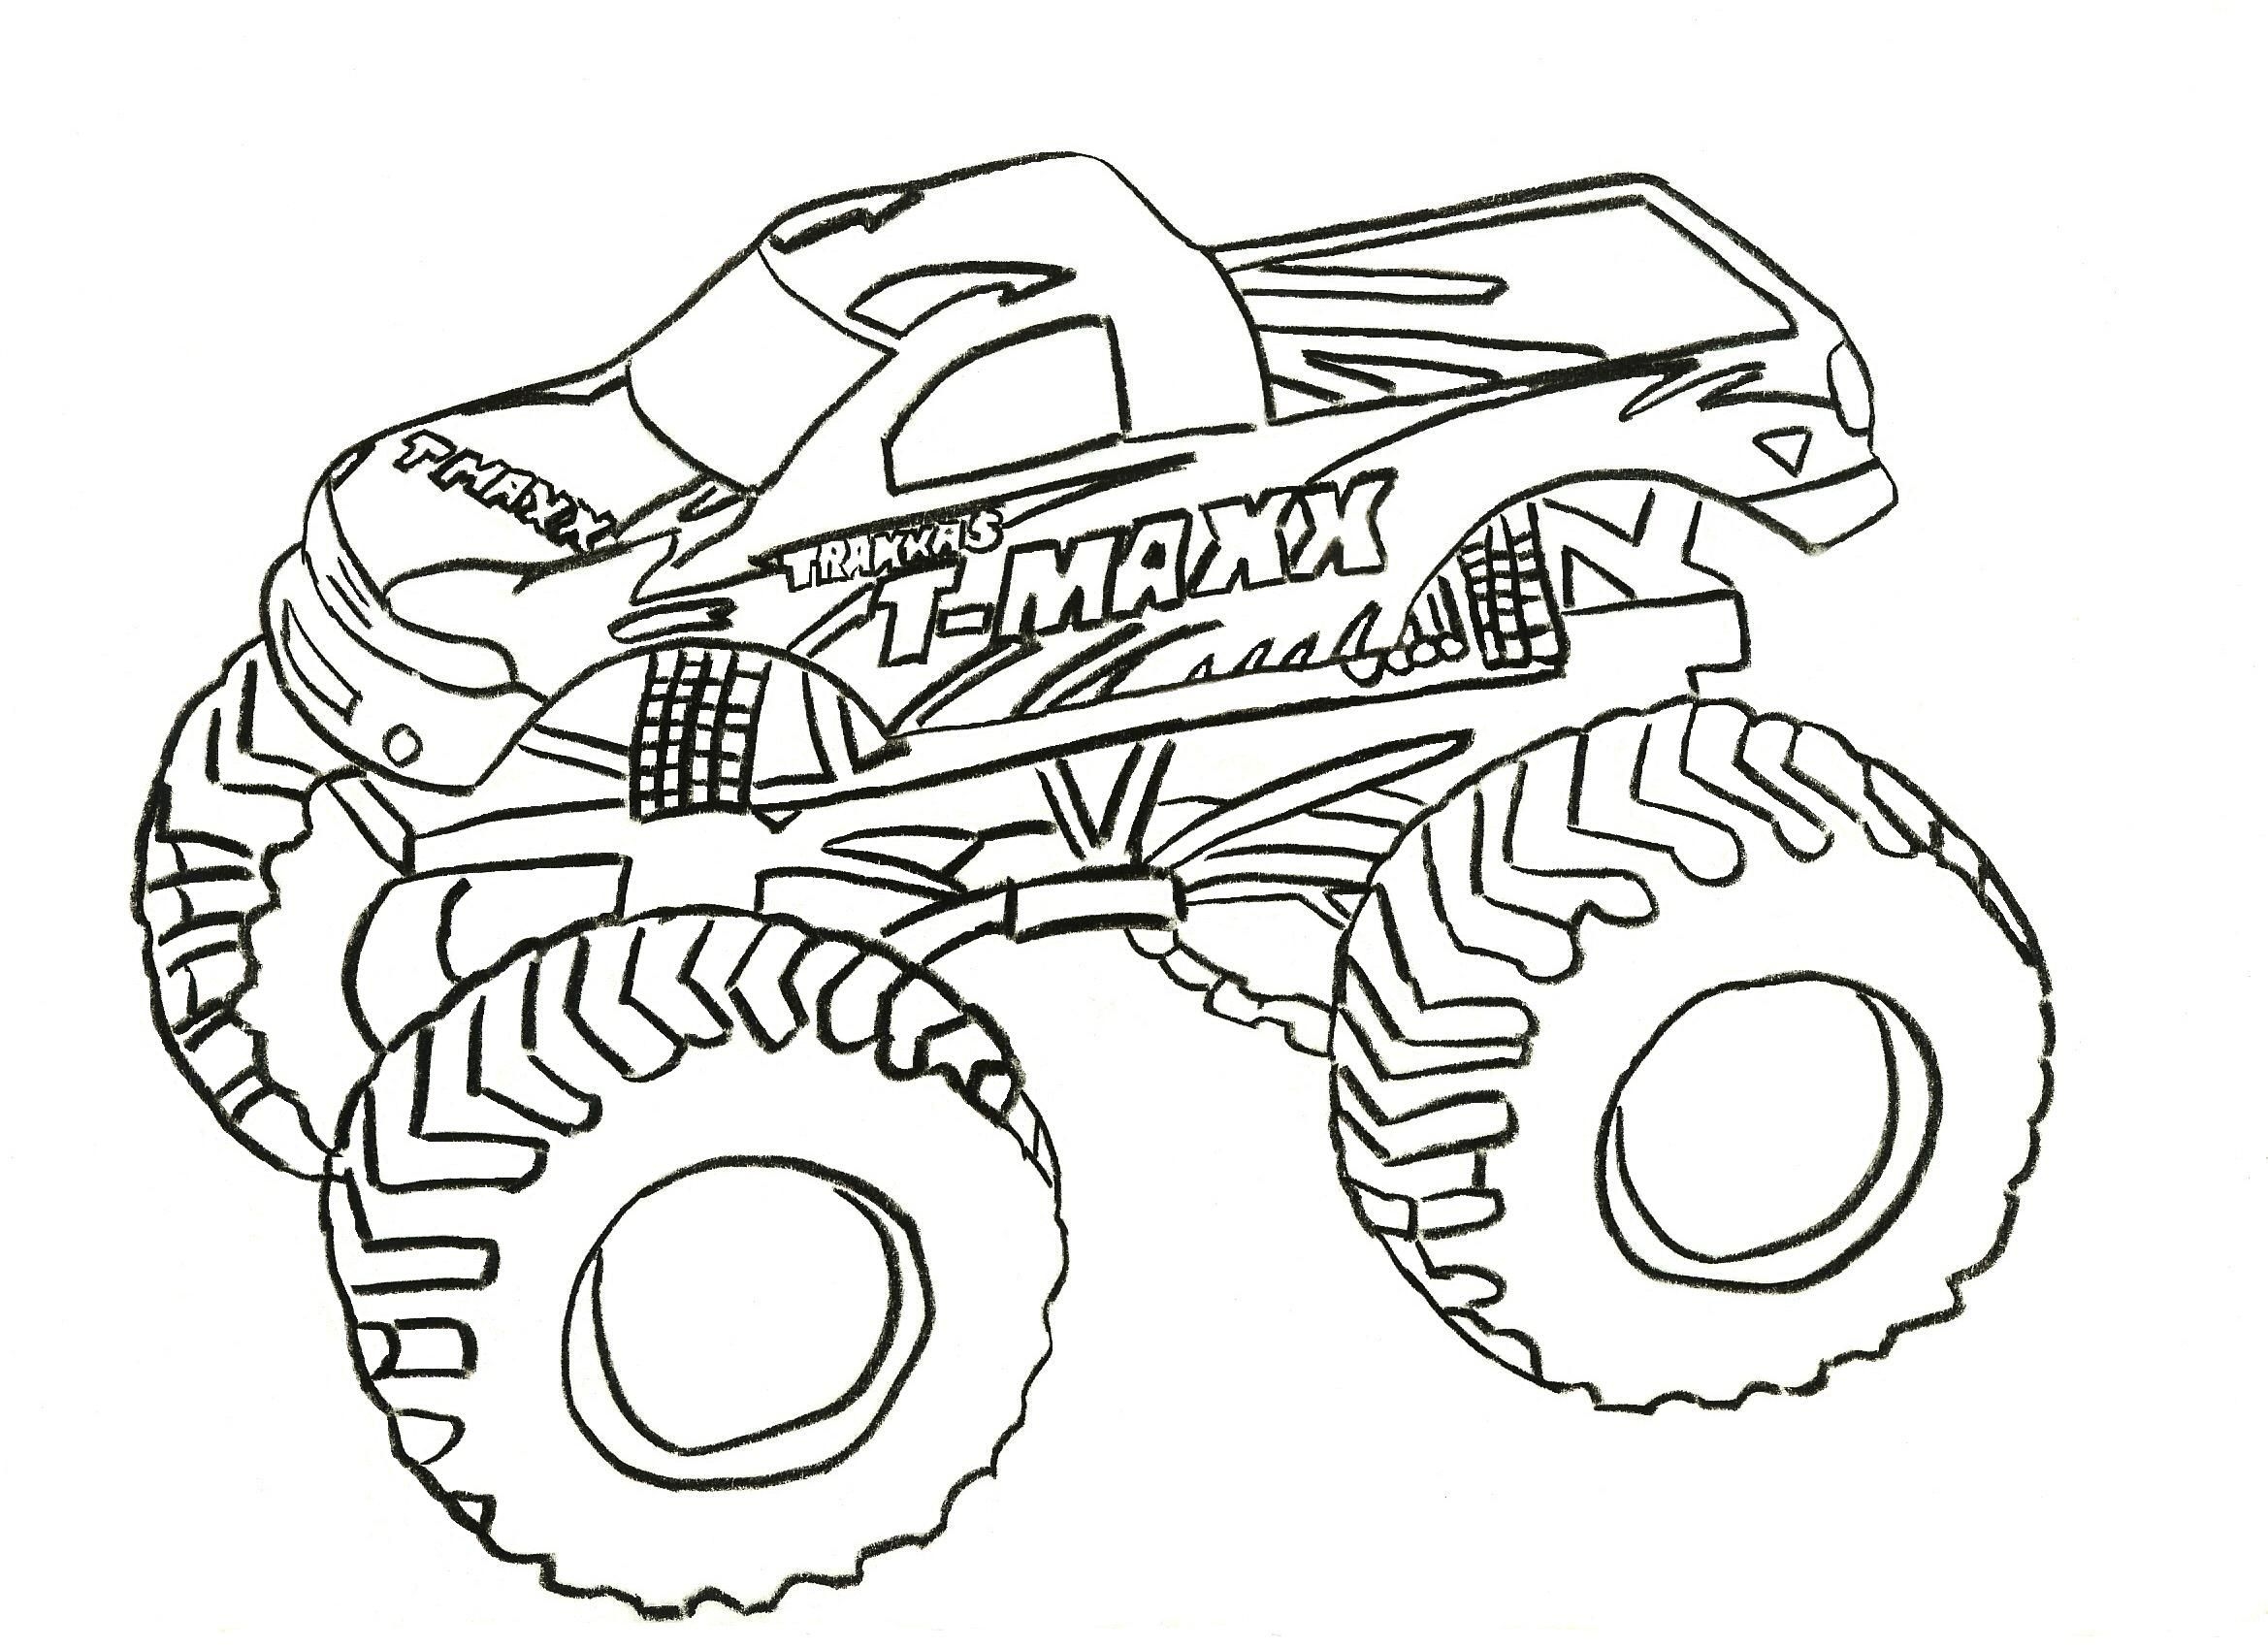 Monster Truck & Cars Coloring